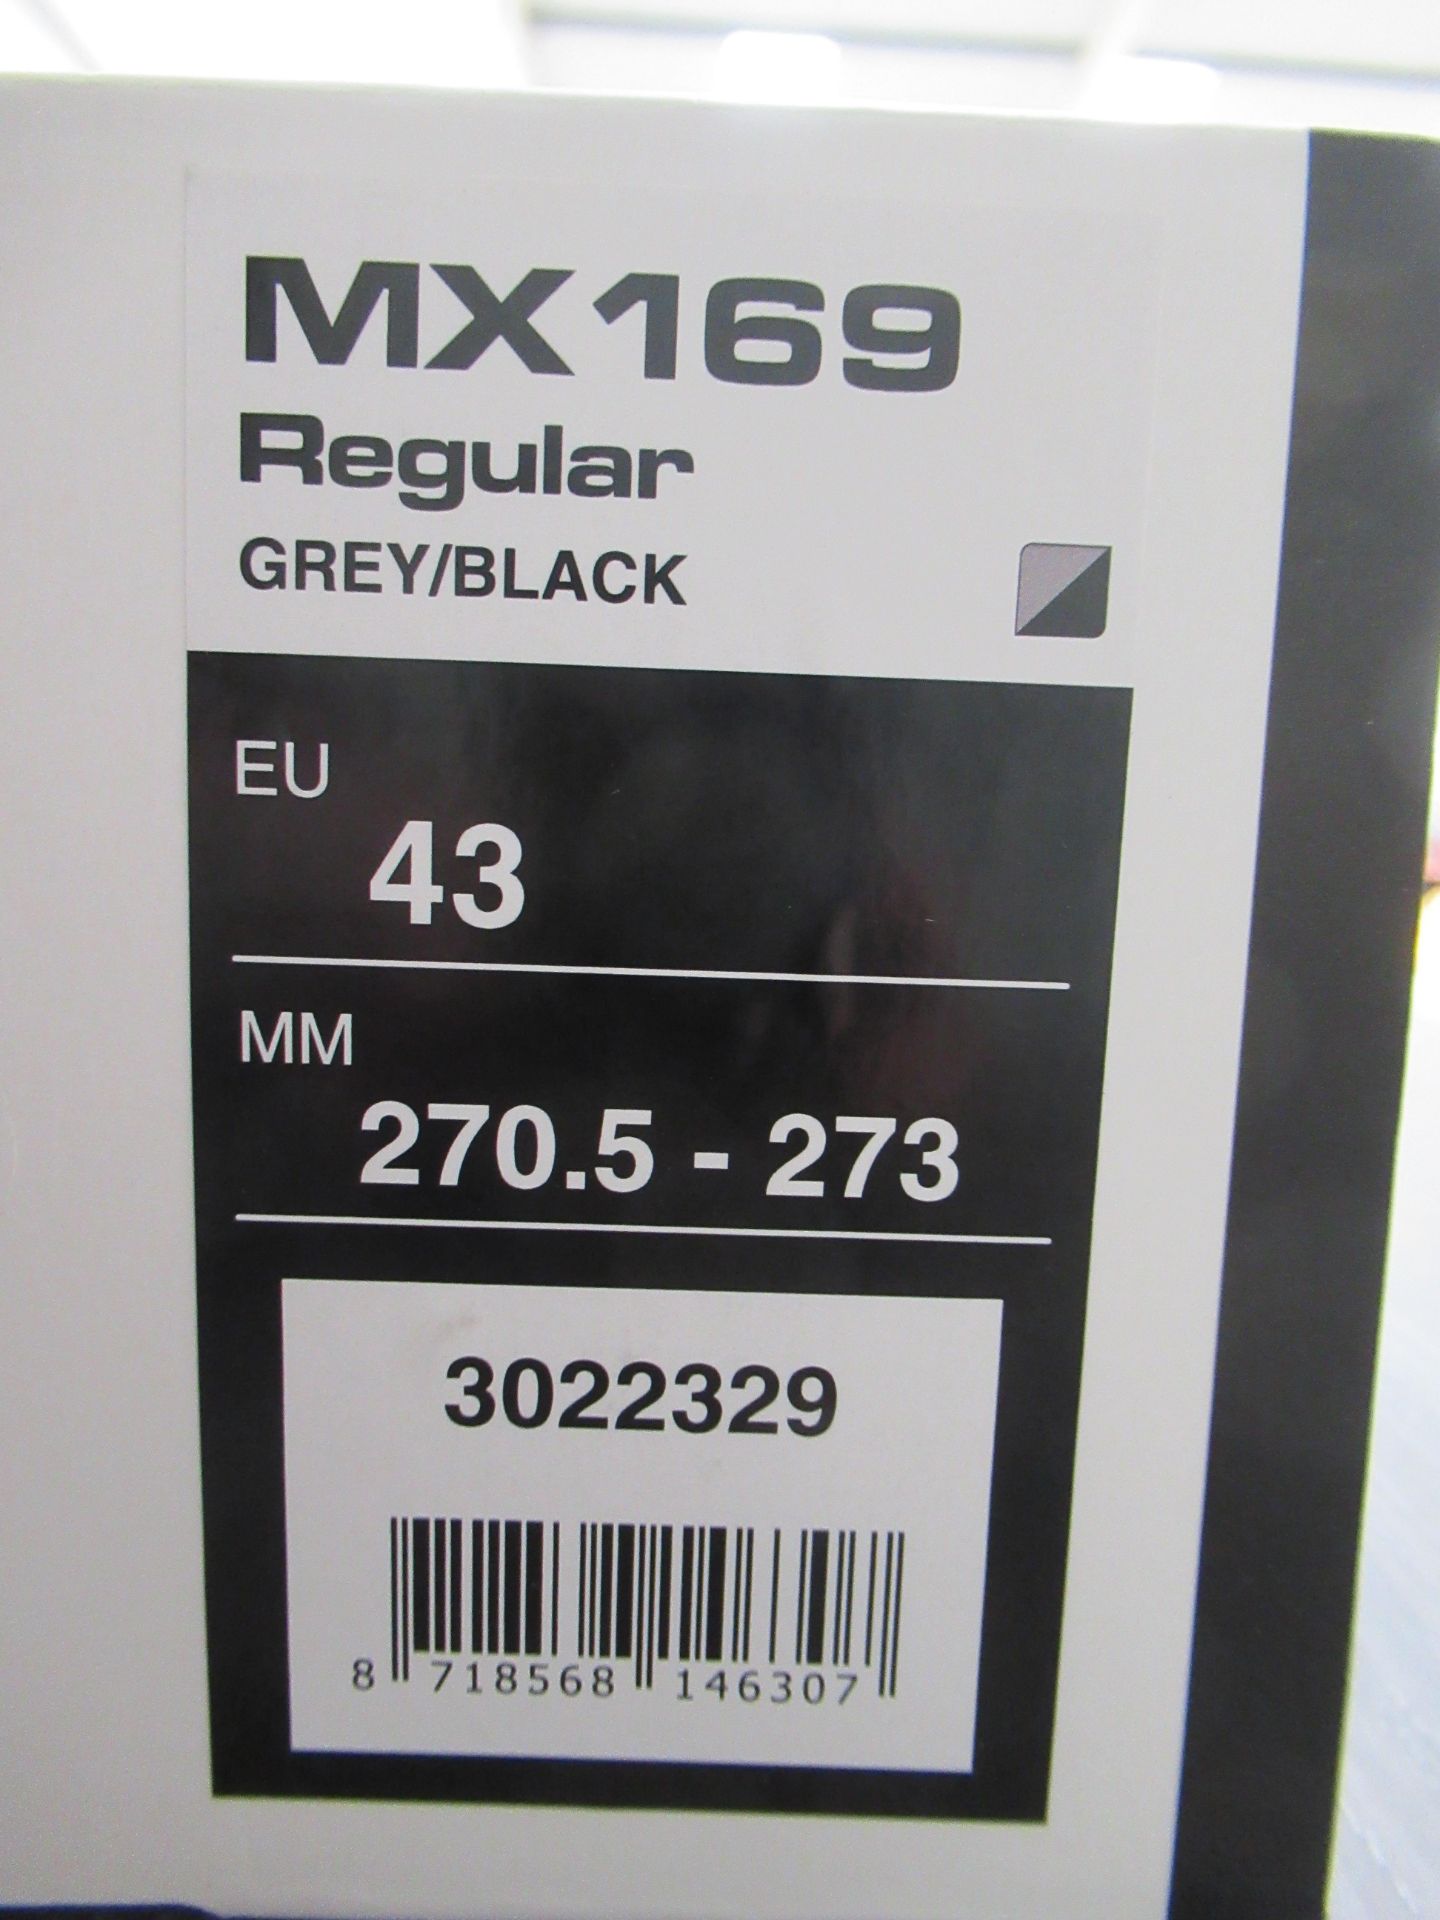 Pair of Lake MX169 cycling shoes (grey/black) - boxed EU size 43 (RRP£142) - Image 3 of 4